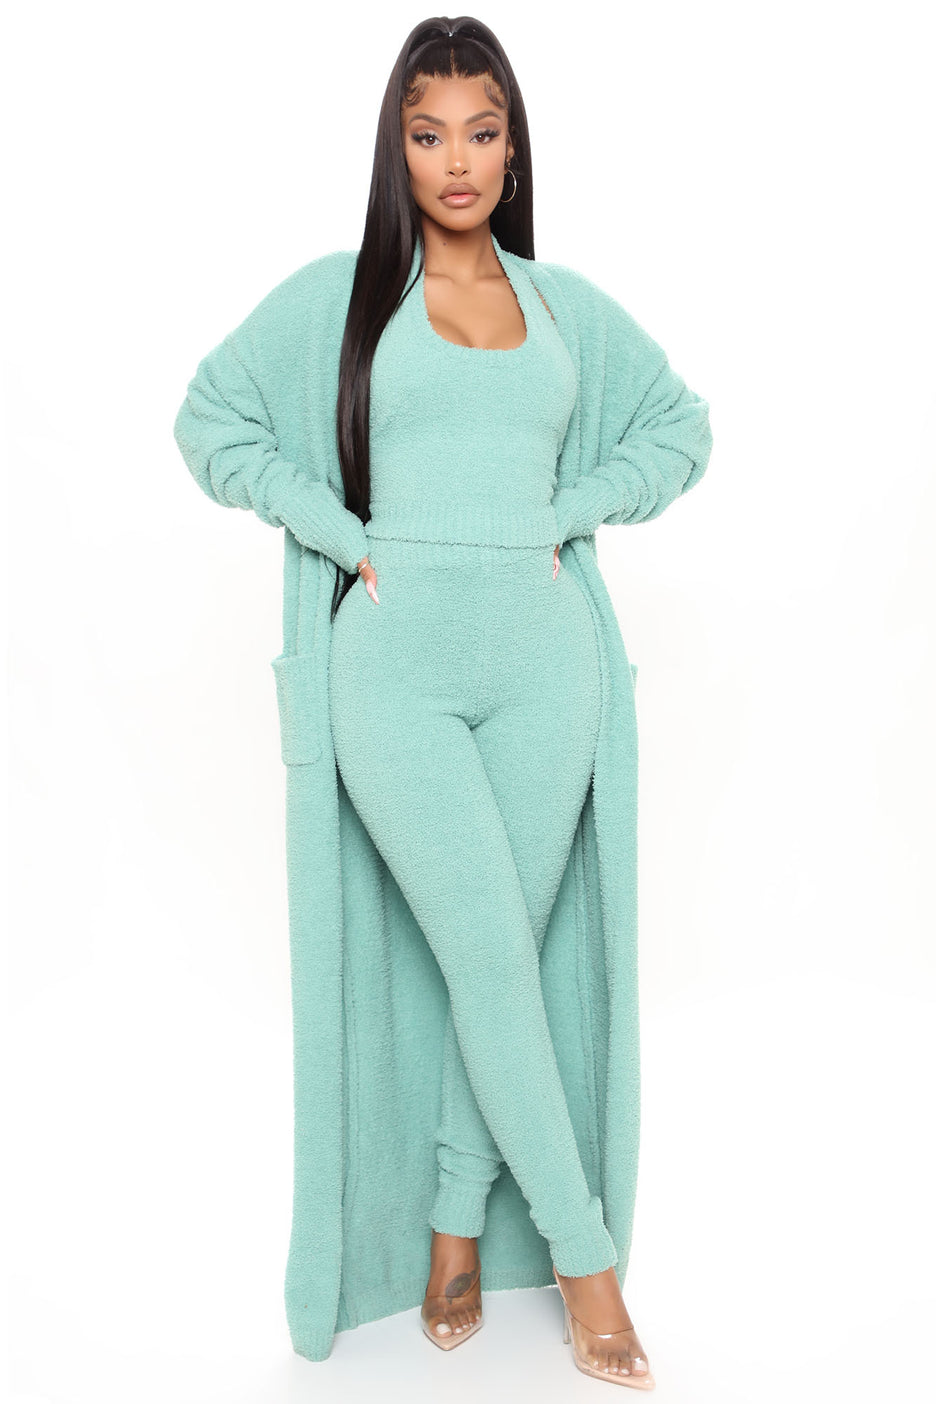 The Top 10 Best Fashion Nova Cozy Sets to Shop this Fall/Winter